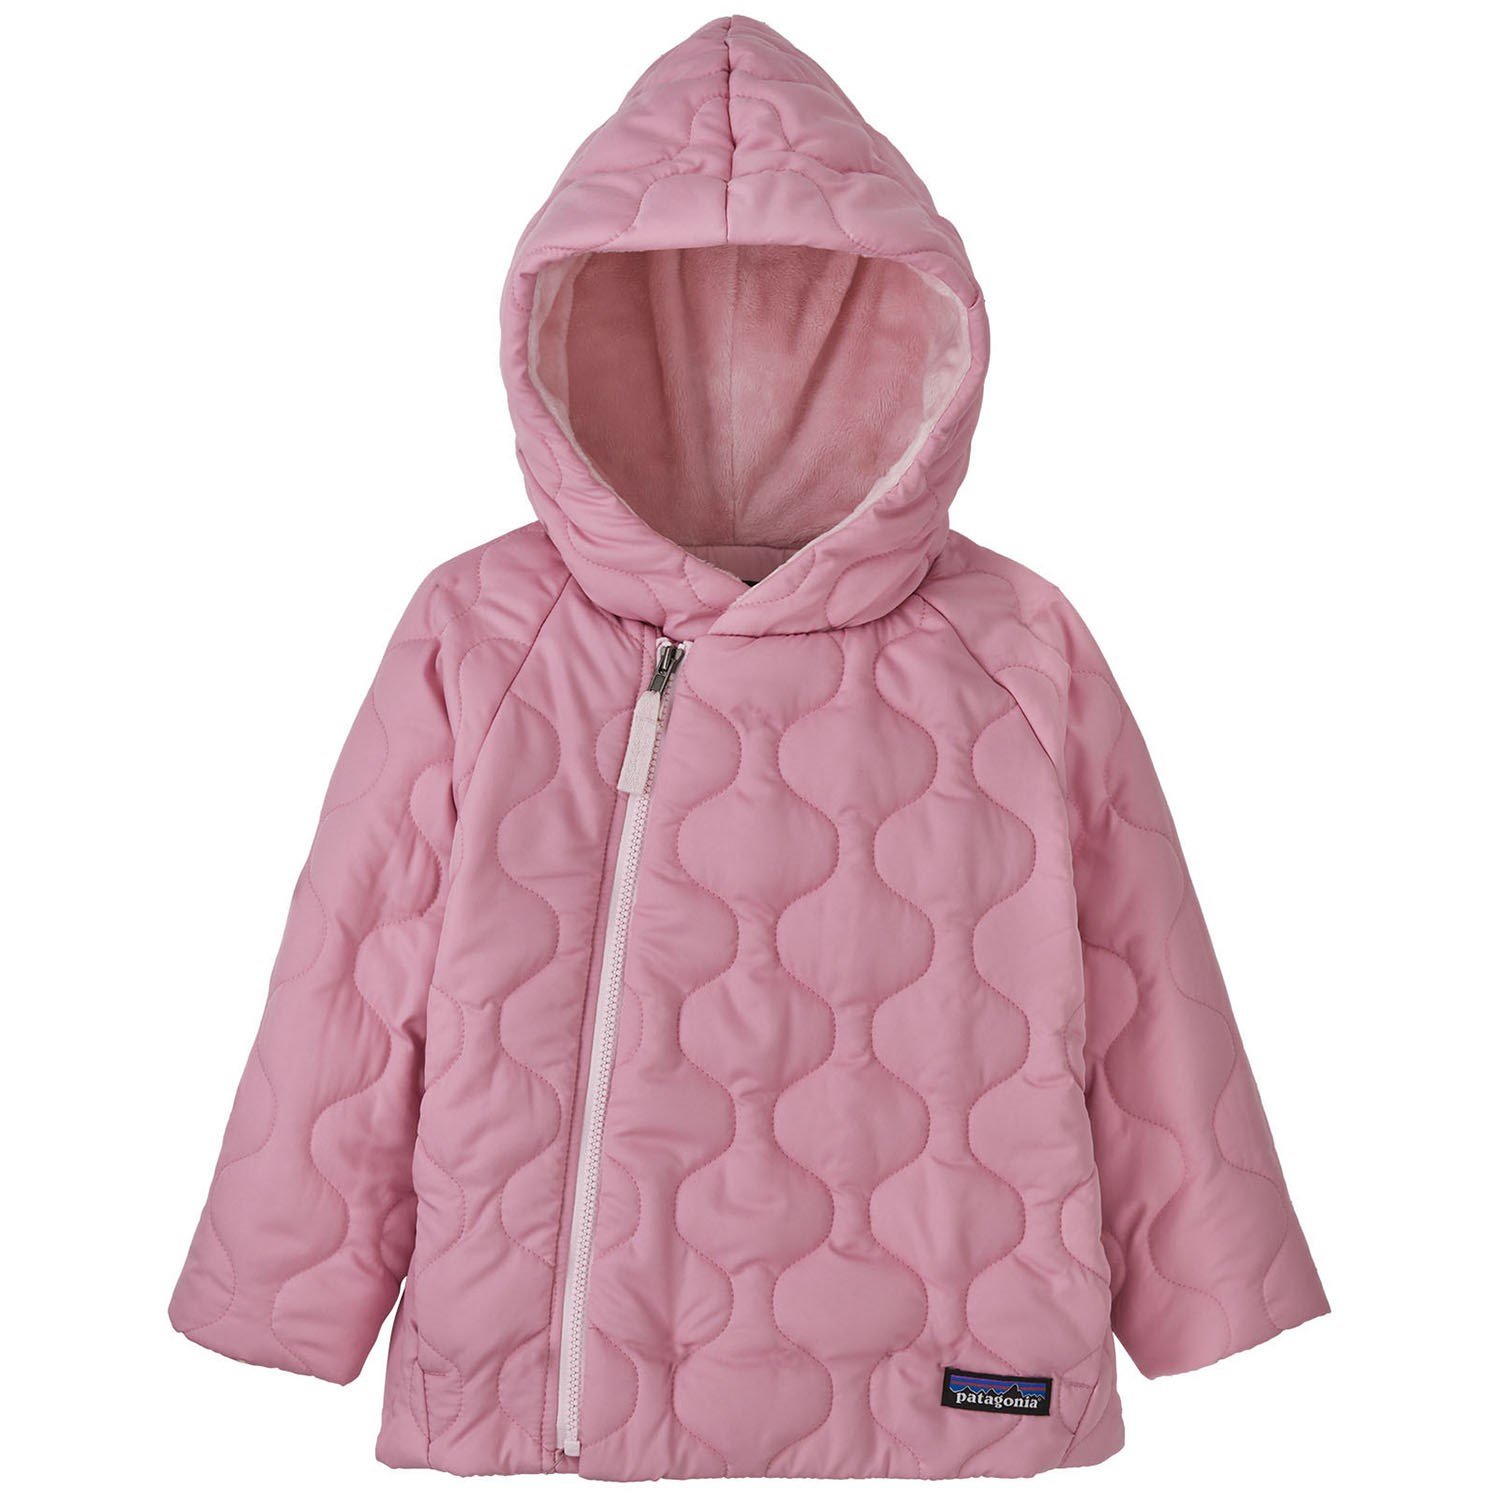 Куртка Patagonia Quilted Puff, цвет Planet Pink куртка patagonia quilted puff цвет planet pink